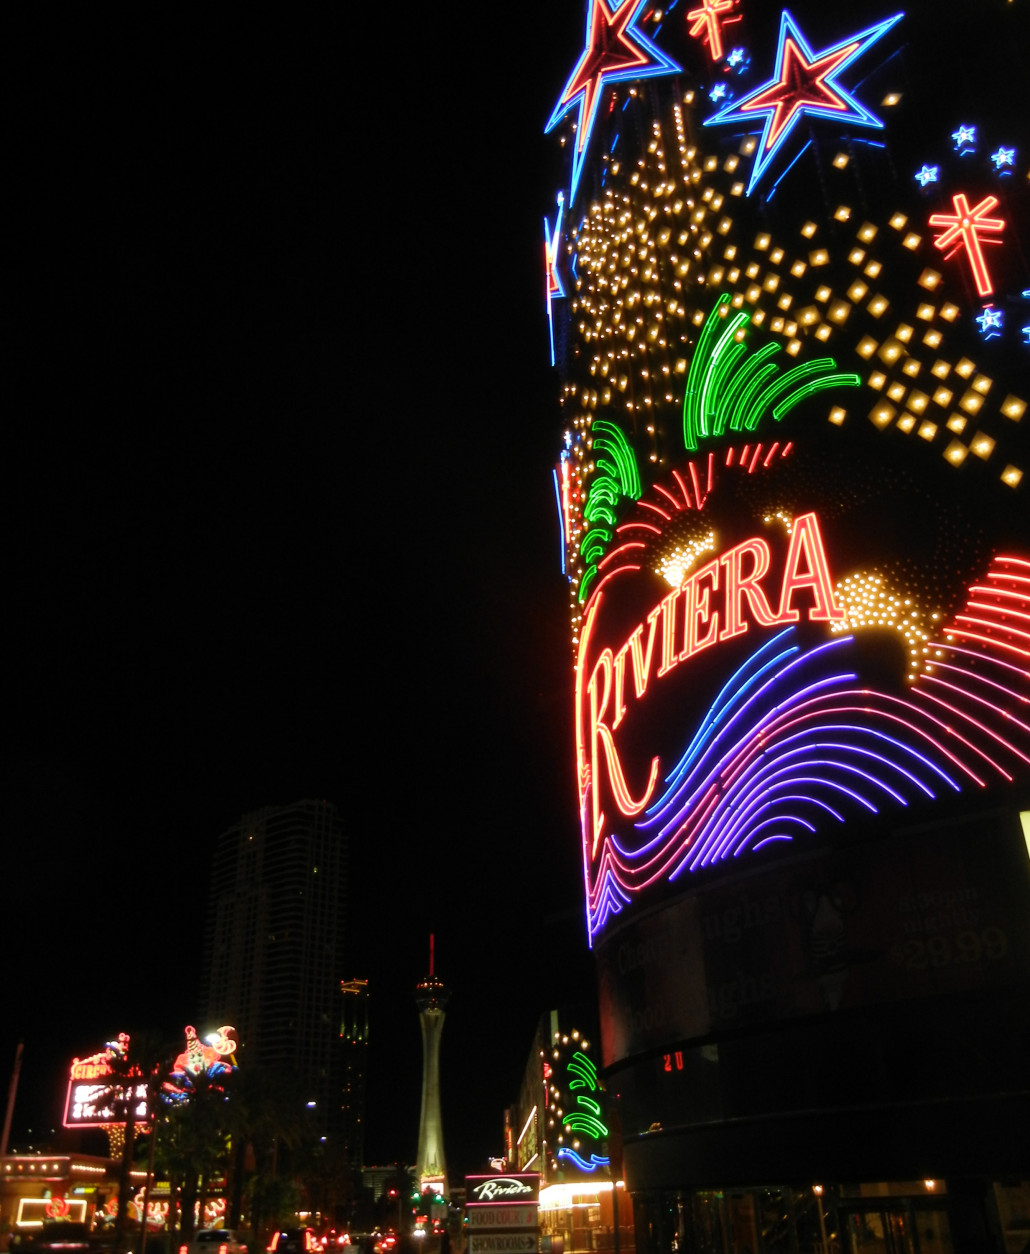 Riviera casino closes after 60 years on Vegas Strip